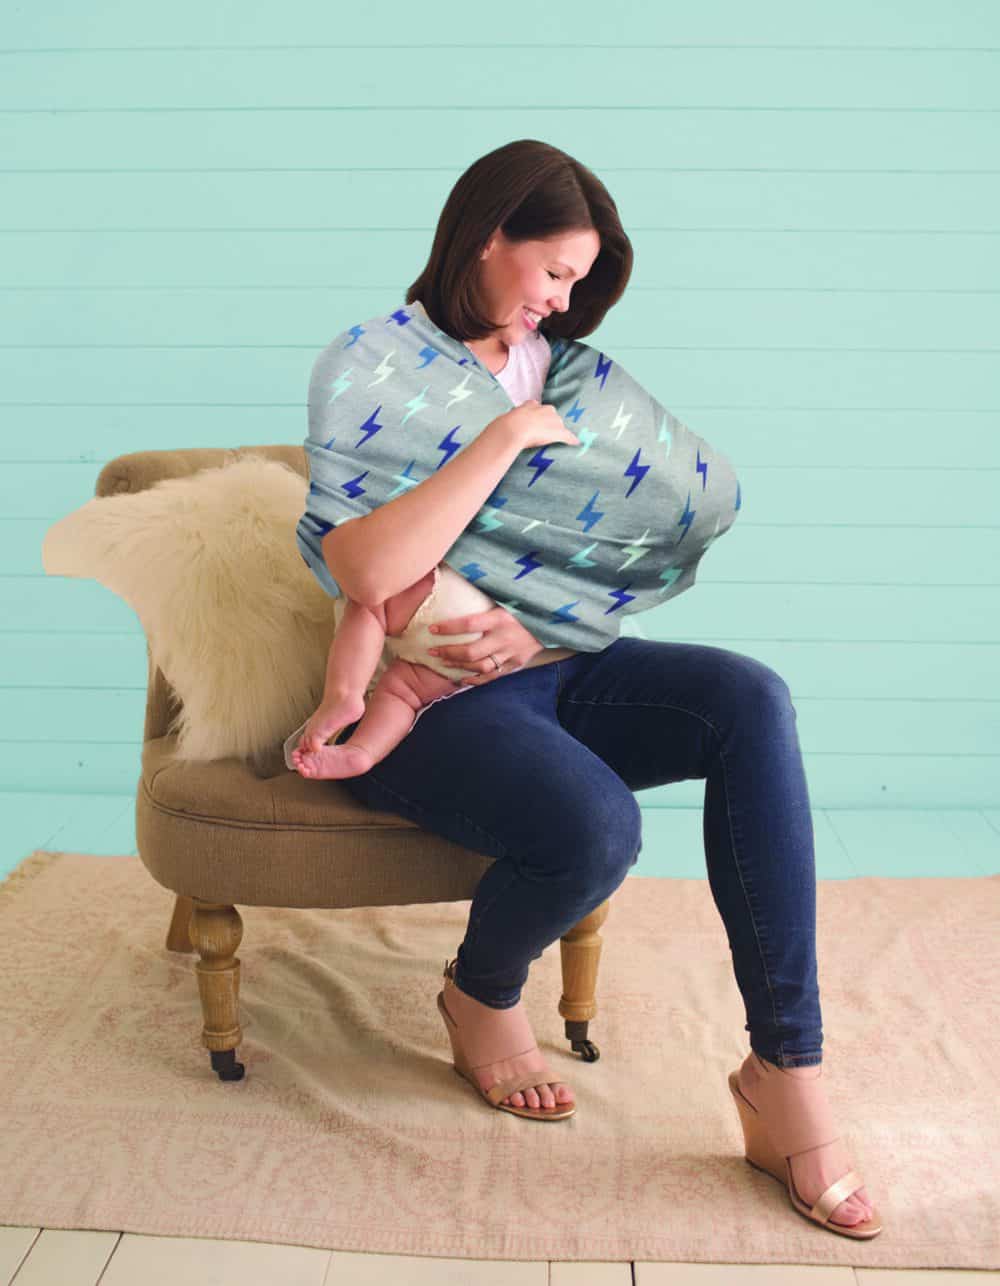 A woman sitting on a chair holding a baby in a Mom Boss™ 4-IN-1 Multi-Use Nursing Cover & Scarf.